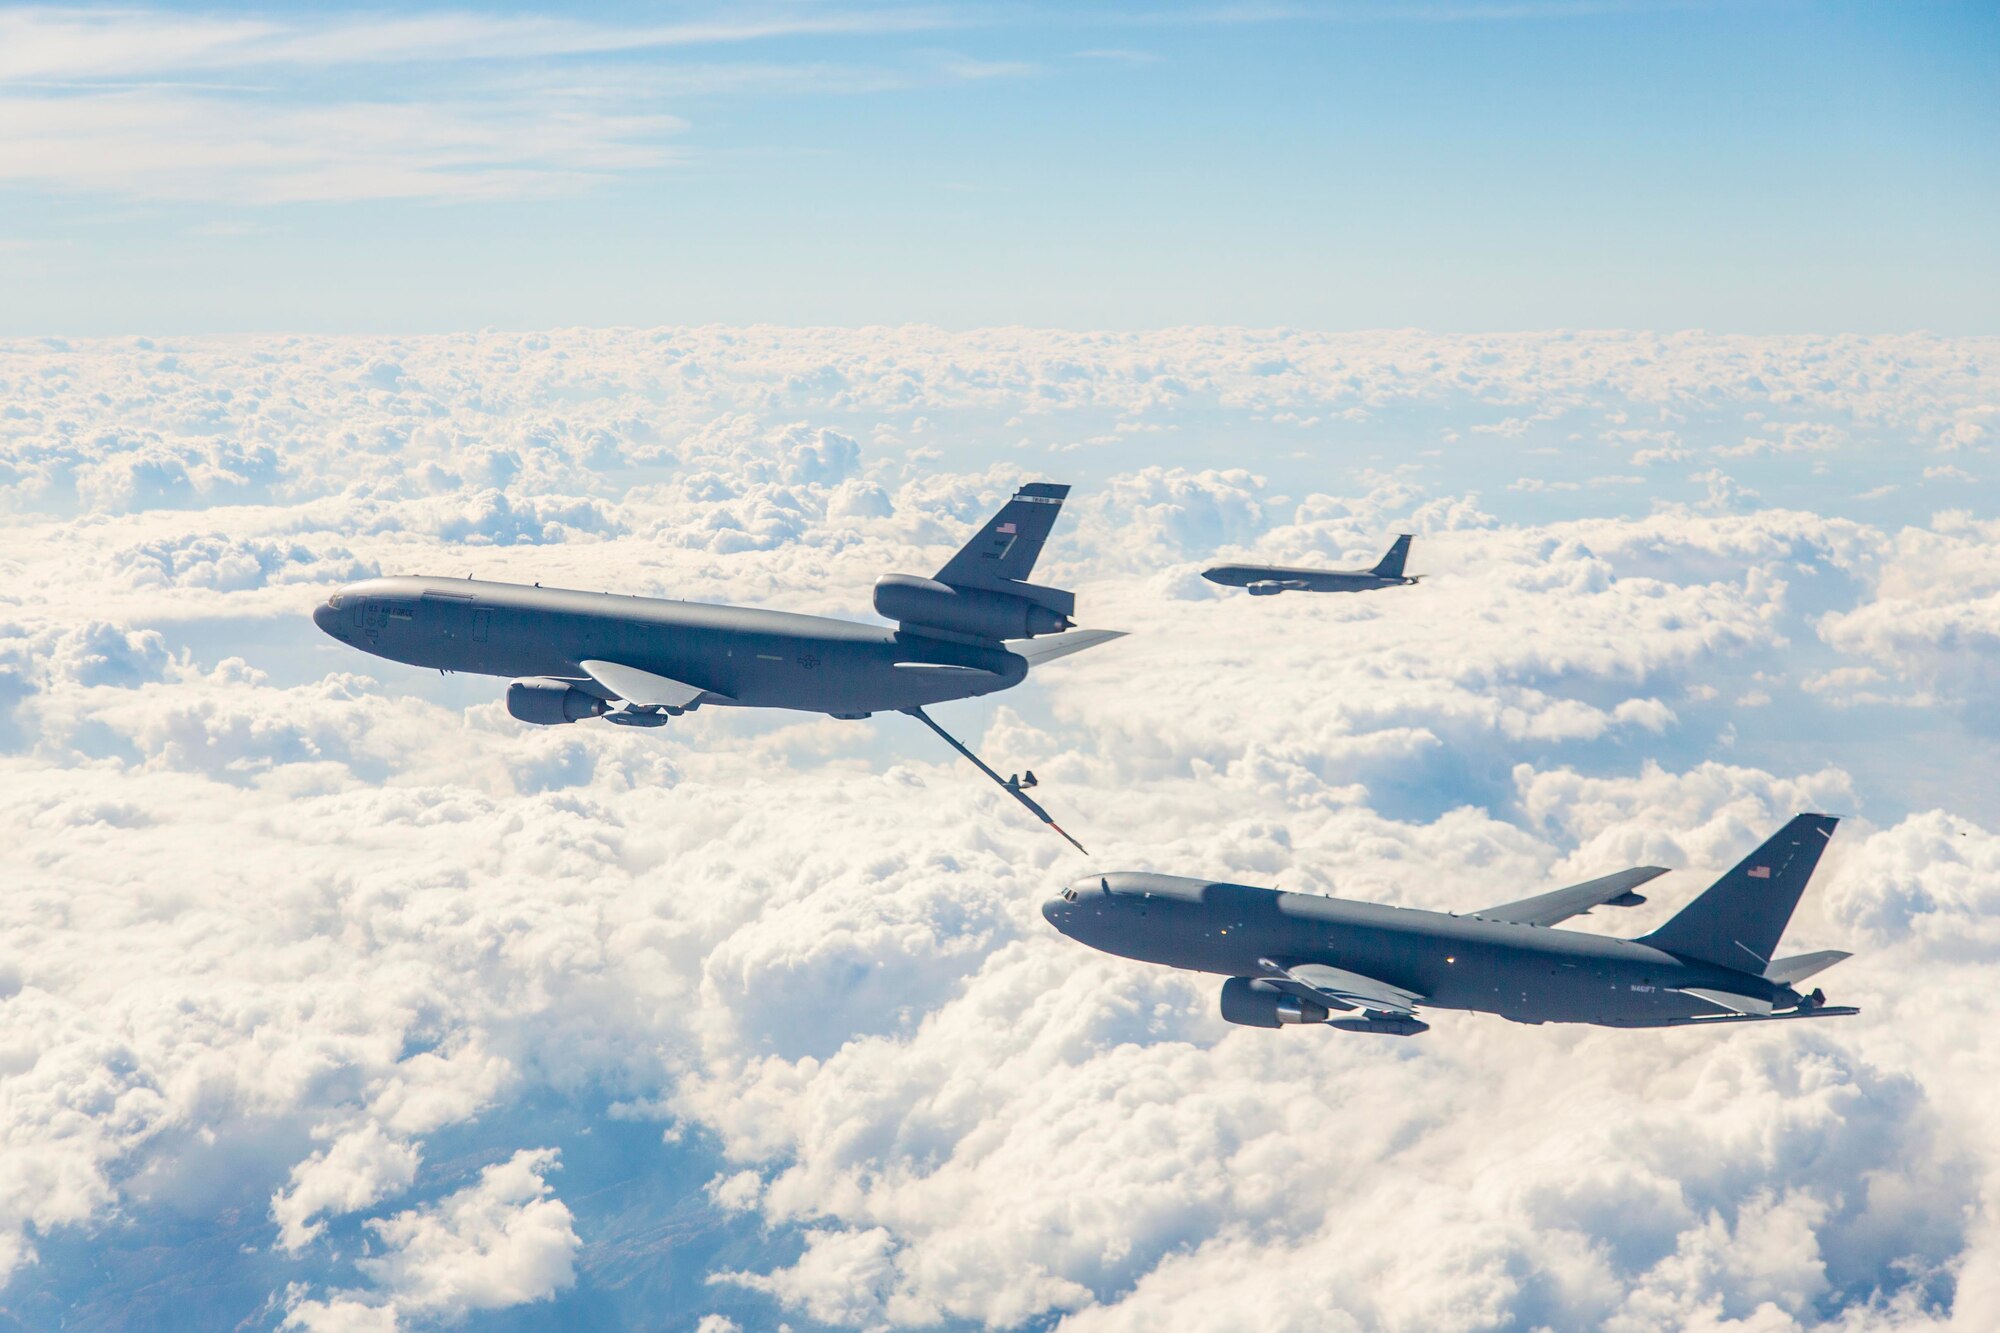 Boeing and the 418th Flight Test Squadron are conducting ground effects and fuel onload fatigue testing on the new KC-46A Pegasus. Fuel onload fatigue tests will gather data to characterize the aircraft interaction typically experienced when the KC-46A is flying in receiver formation behind a current KC-135 Stratotanker or KC-10 Extender. While the KC-46's role is to refuel other aircraft, it too may need to be refueled from other KC-10s or KC-135s to extend its range. Fuel onload fatigue testing is the first look at the KC-46 acting in that role. (U.S. Air Force photo/Christopher Okula) 